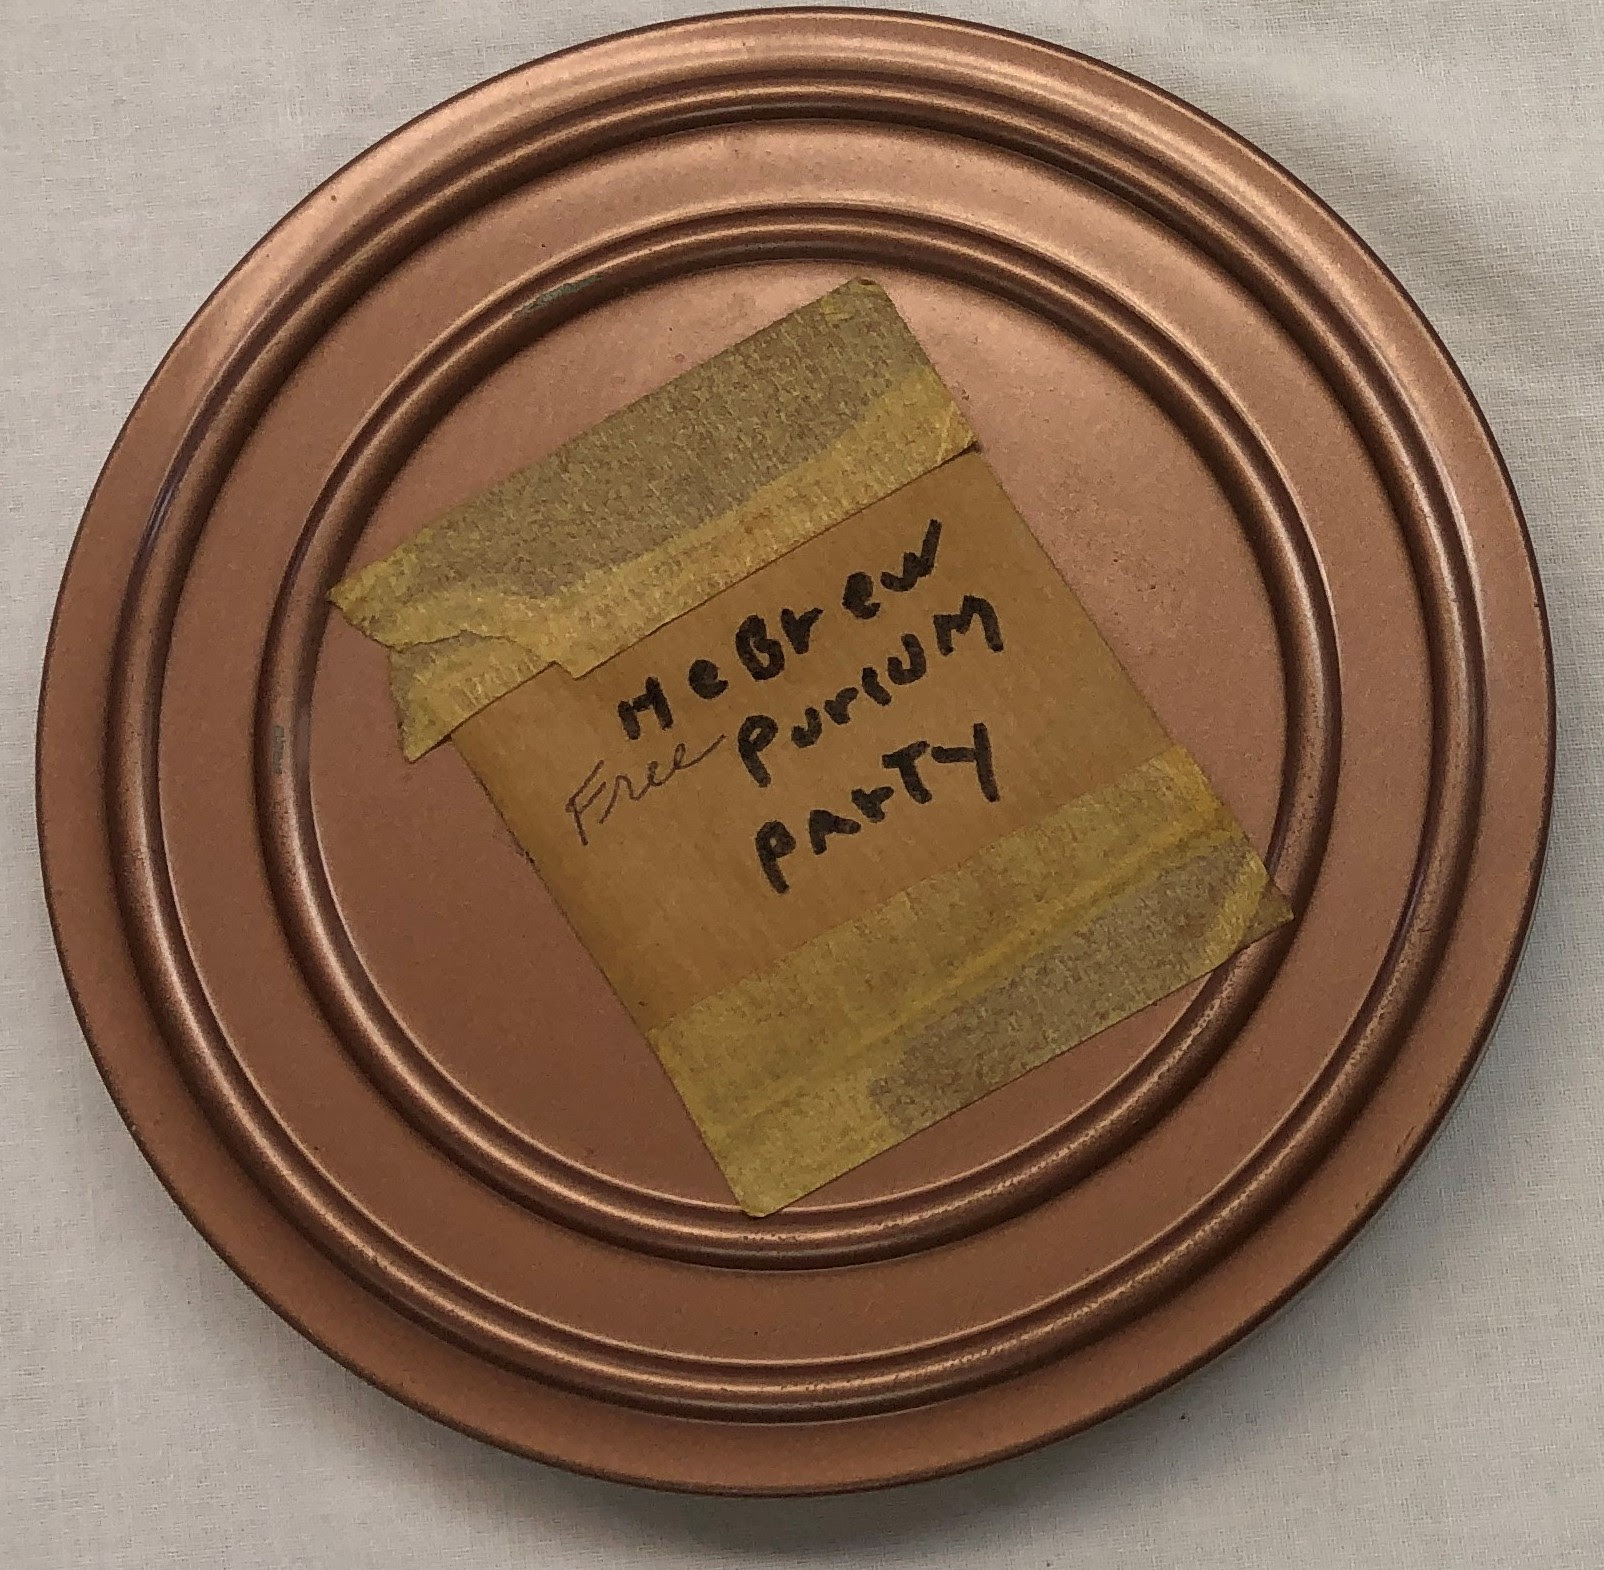 Paterson Hebrew Free School Purim party film donated by Maxine and Jon Schein.